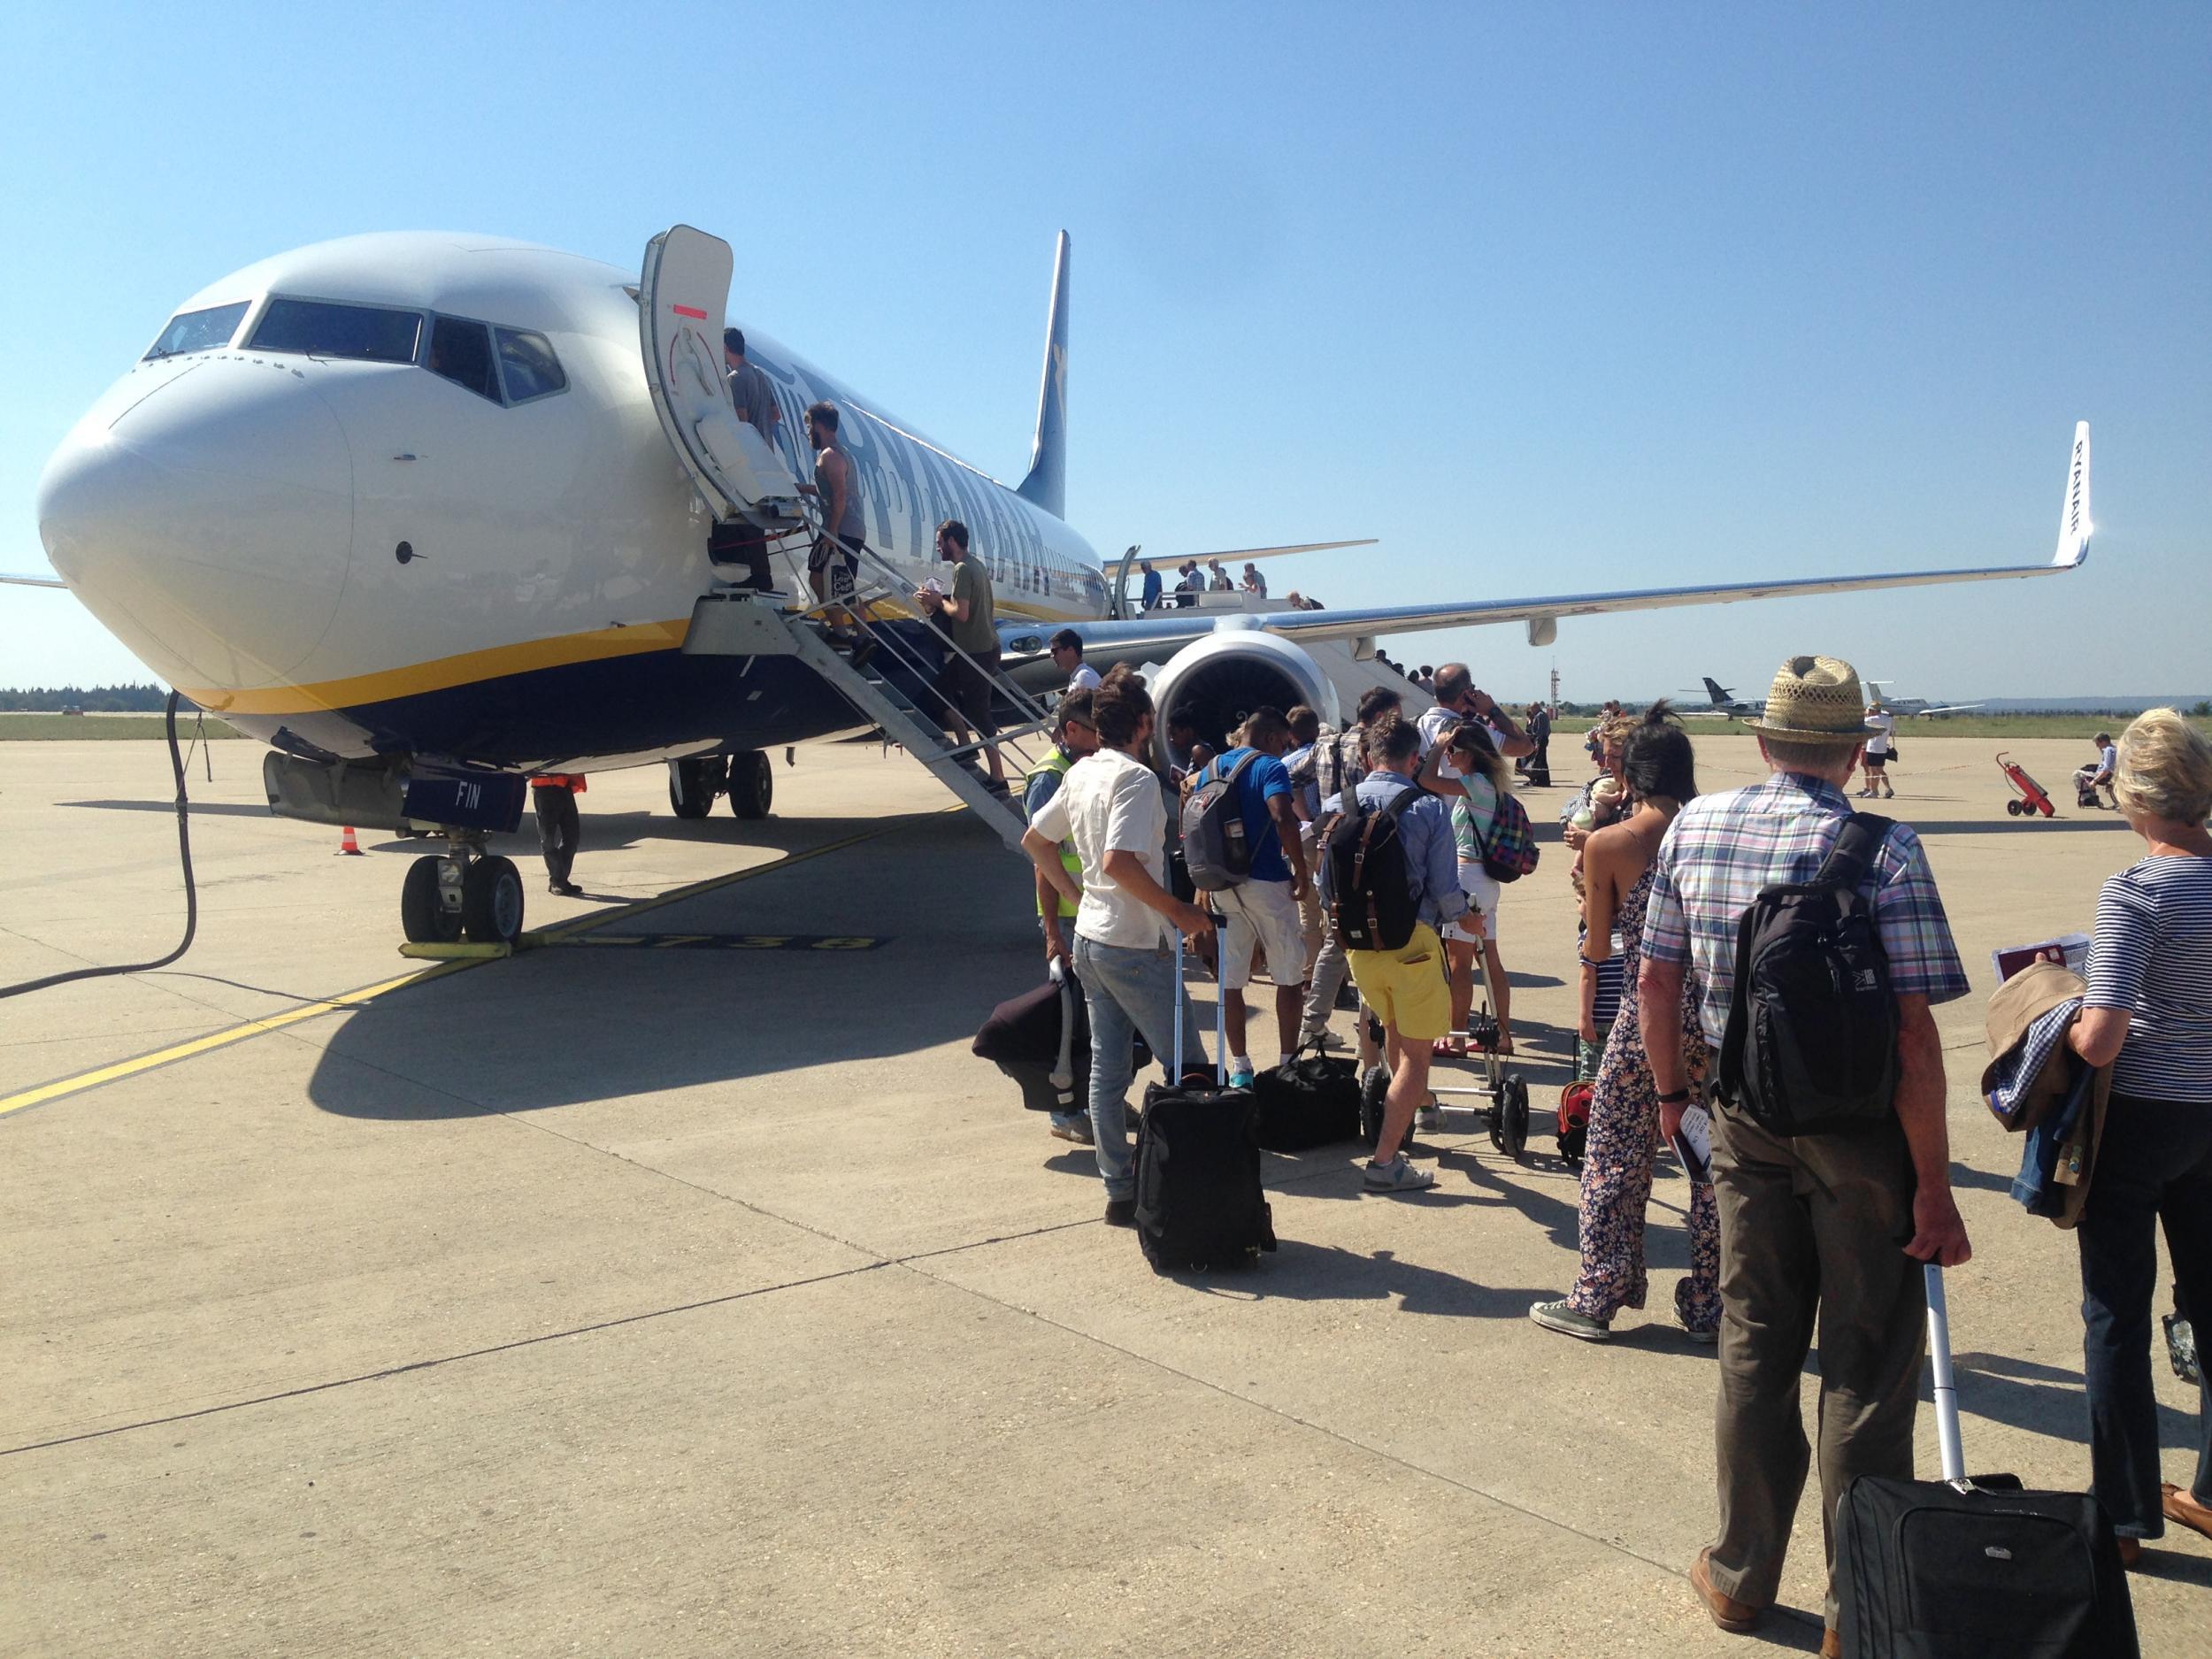 Ryanair says parents without pre-booked seats have caused problems on board